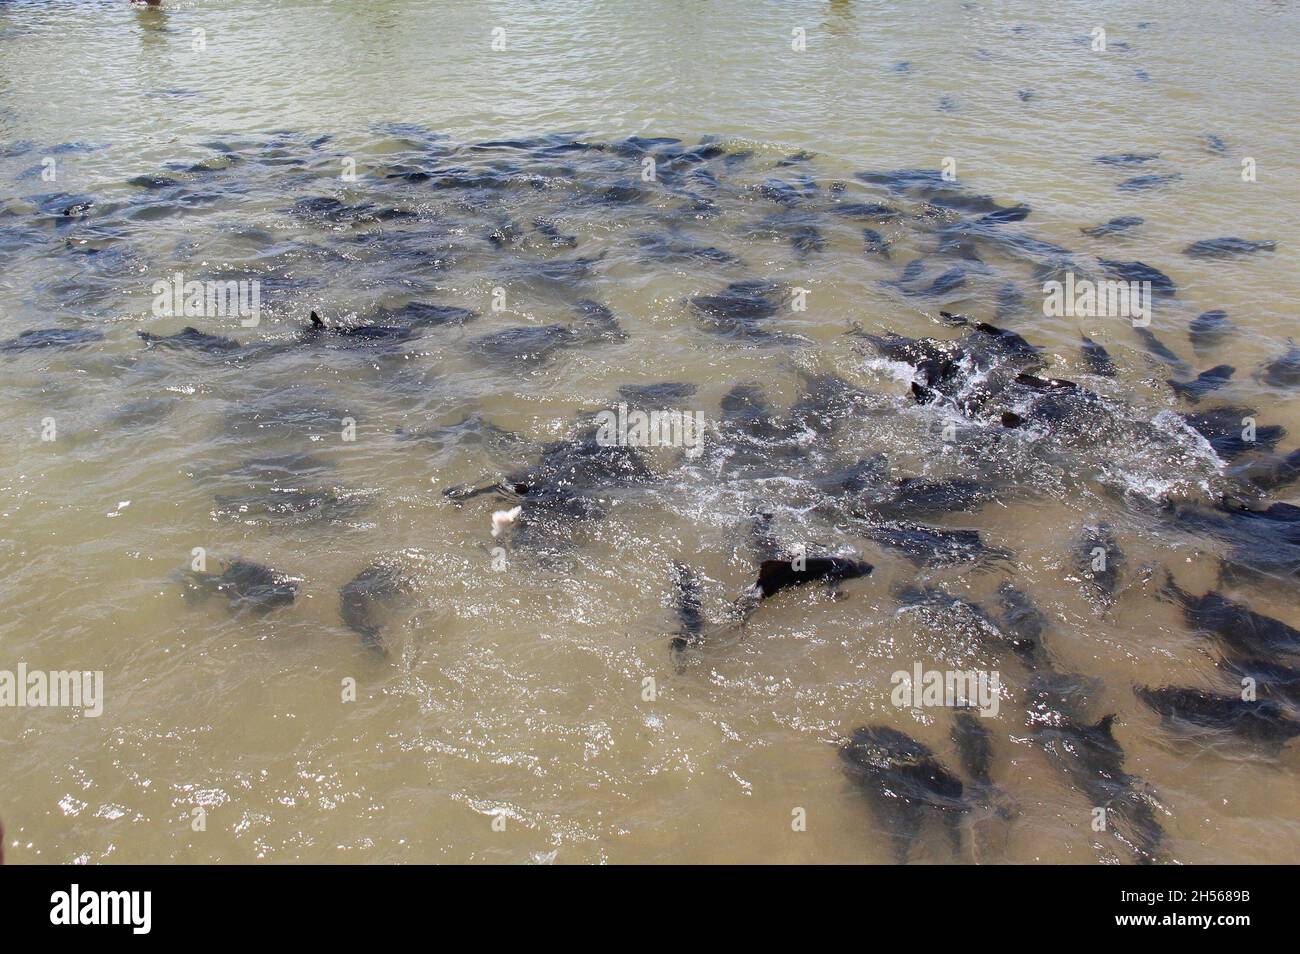 School of fish, view from the surface of a lake, in Bonito Mato Grosso do sul, Brazil. Stock Photo